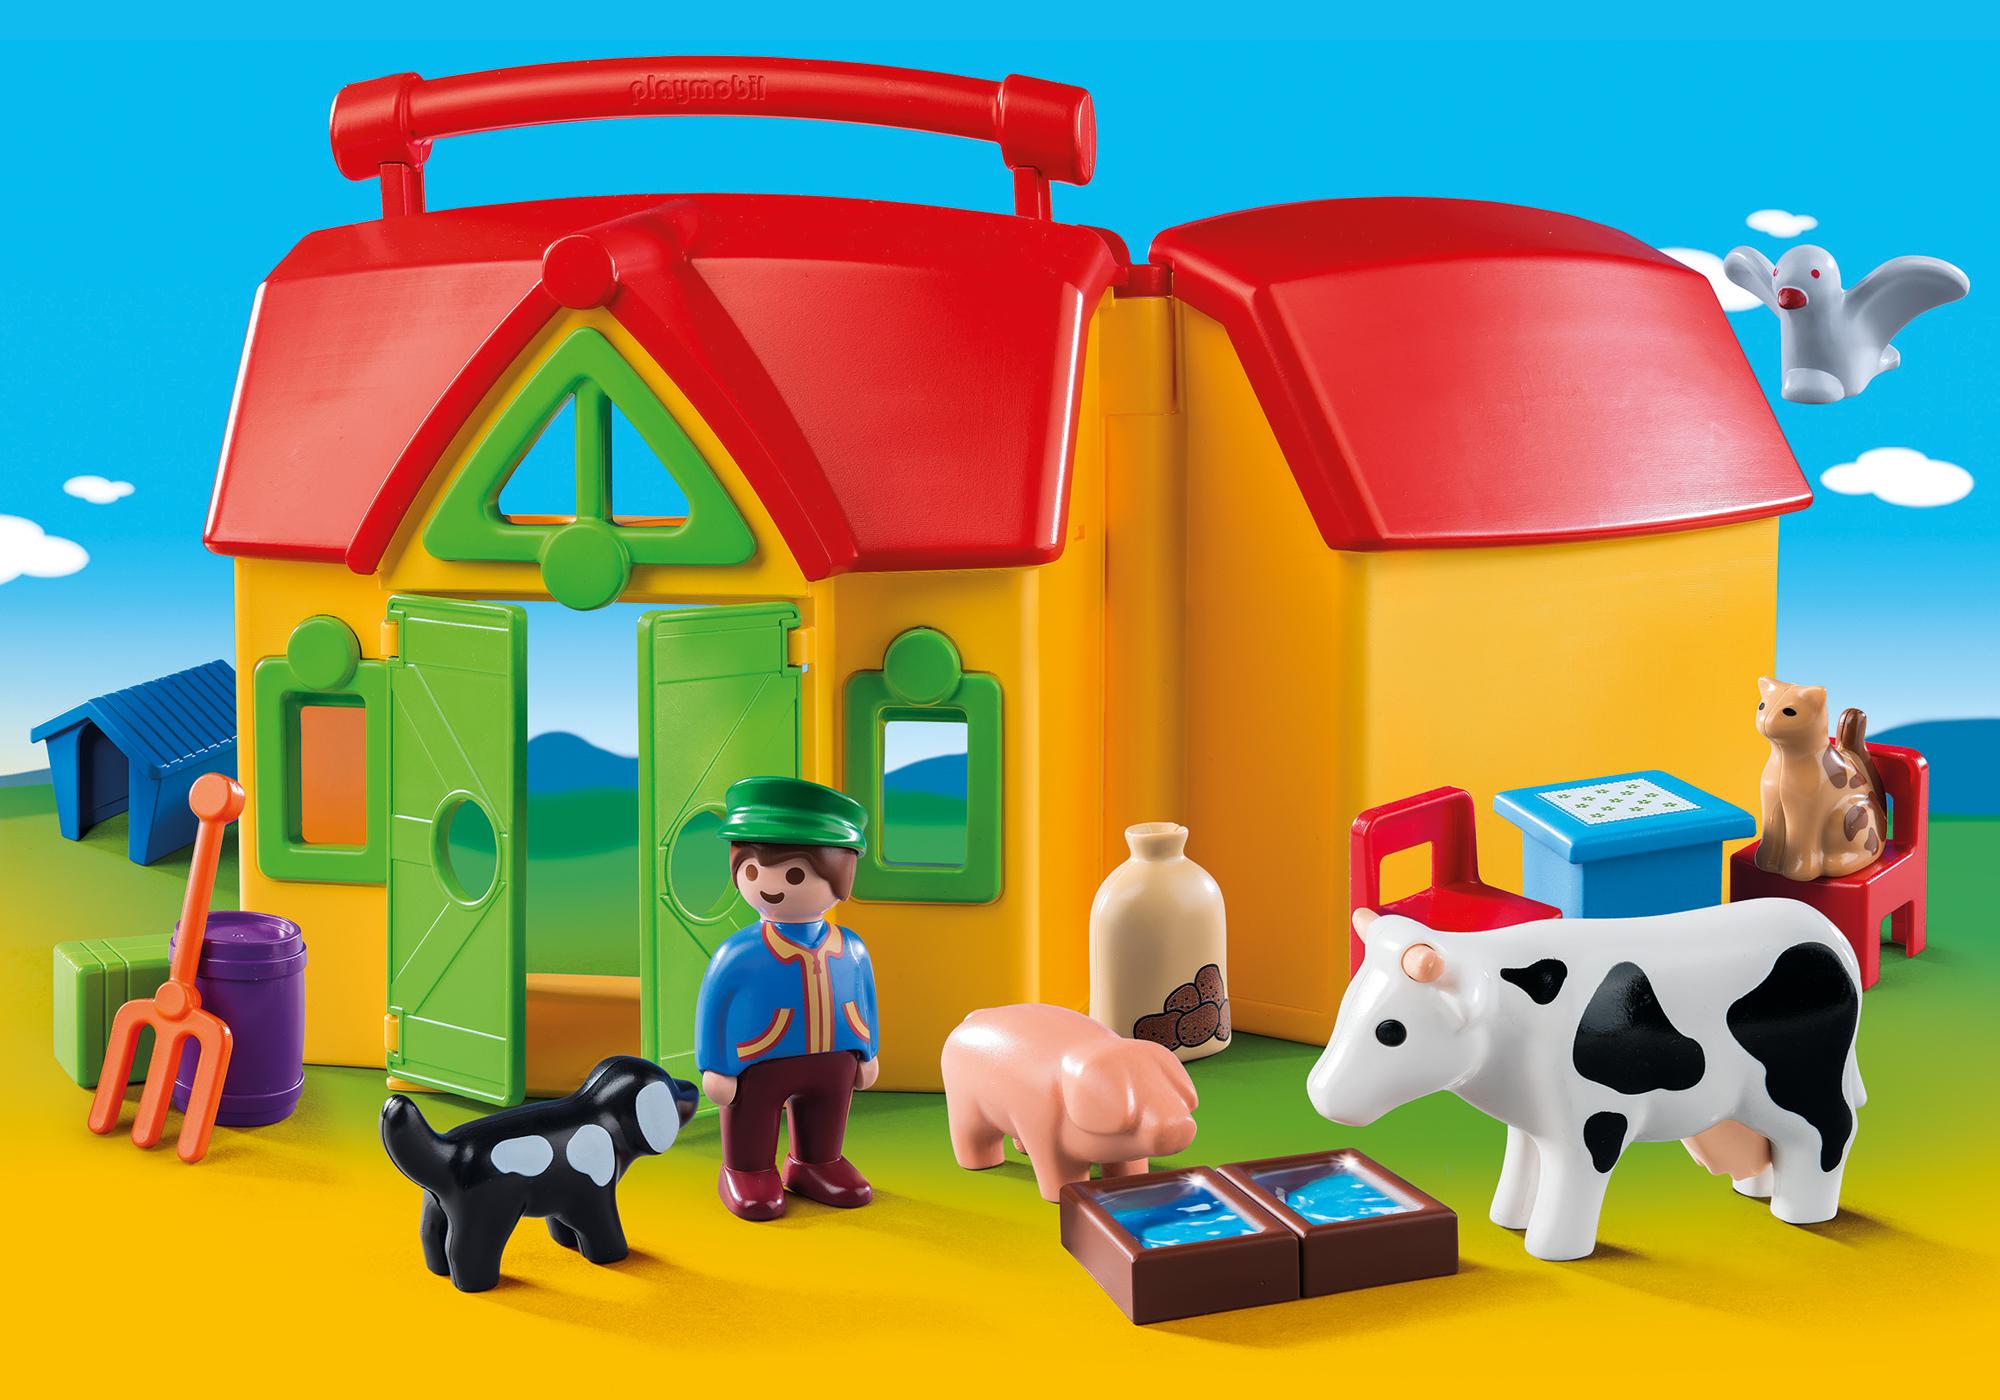 playmobil for 1 year old